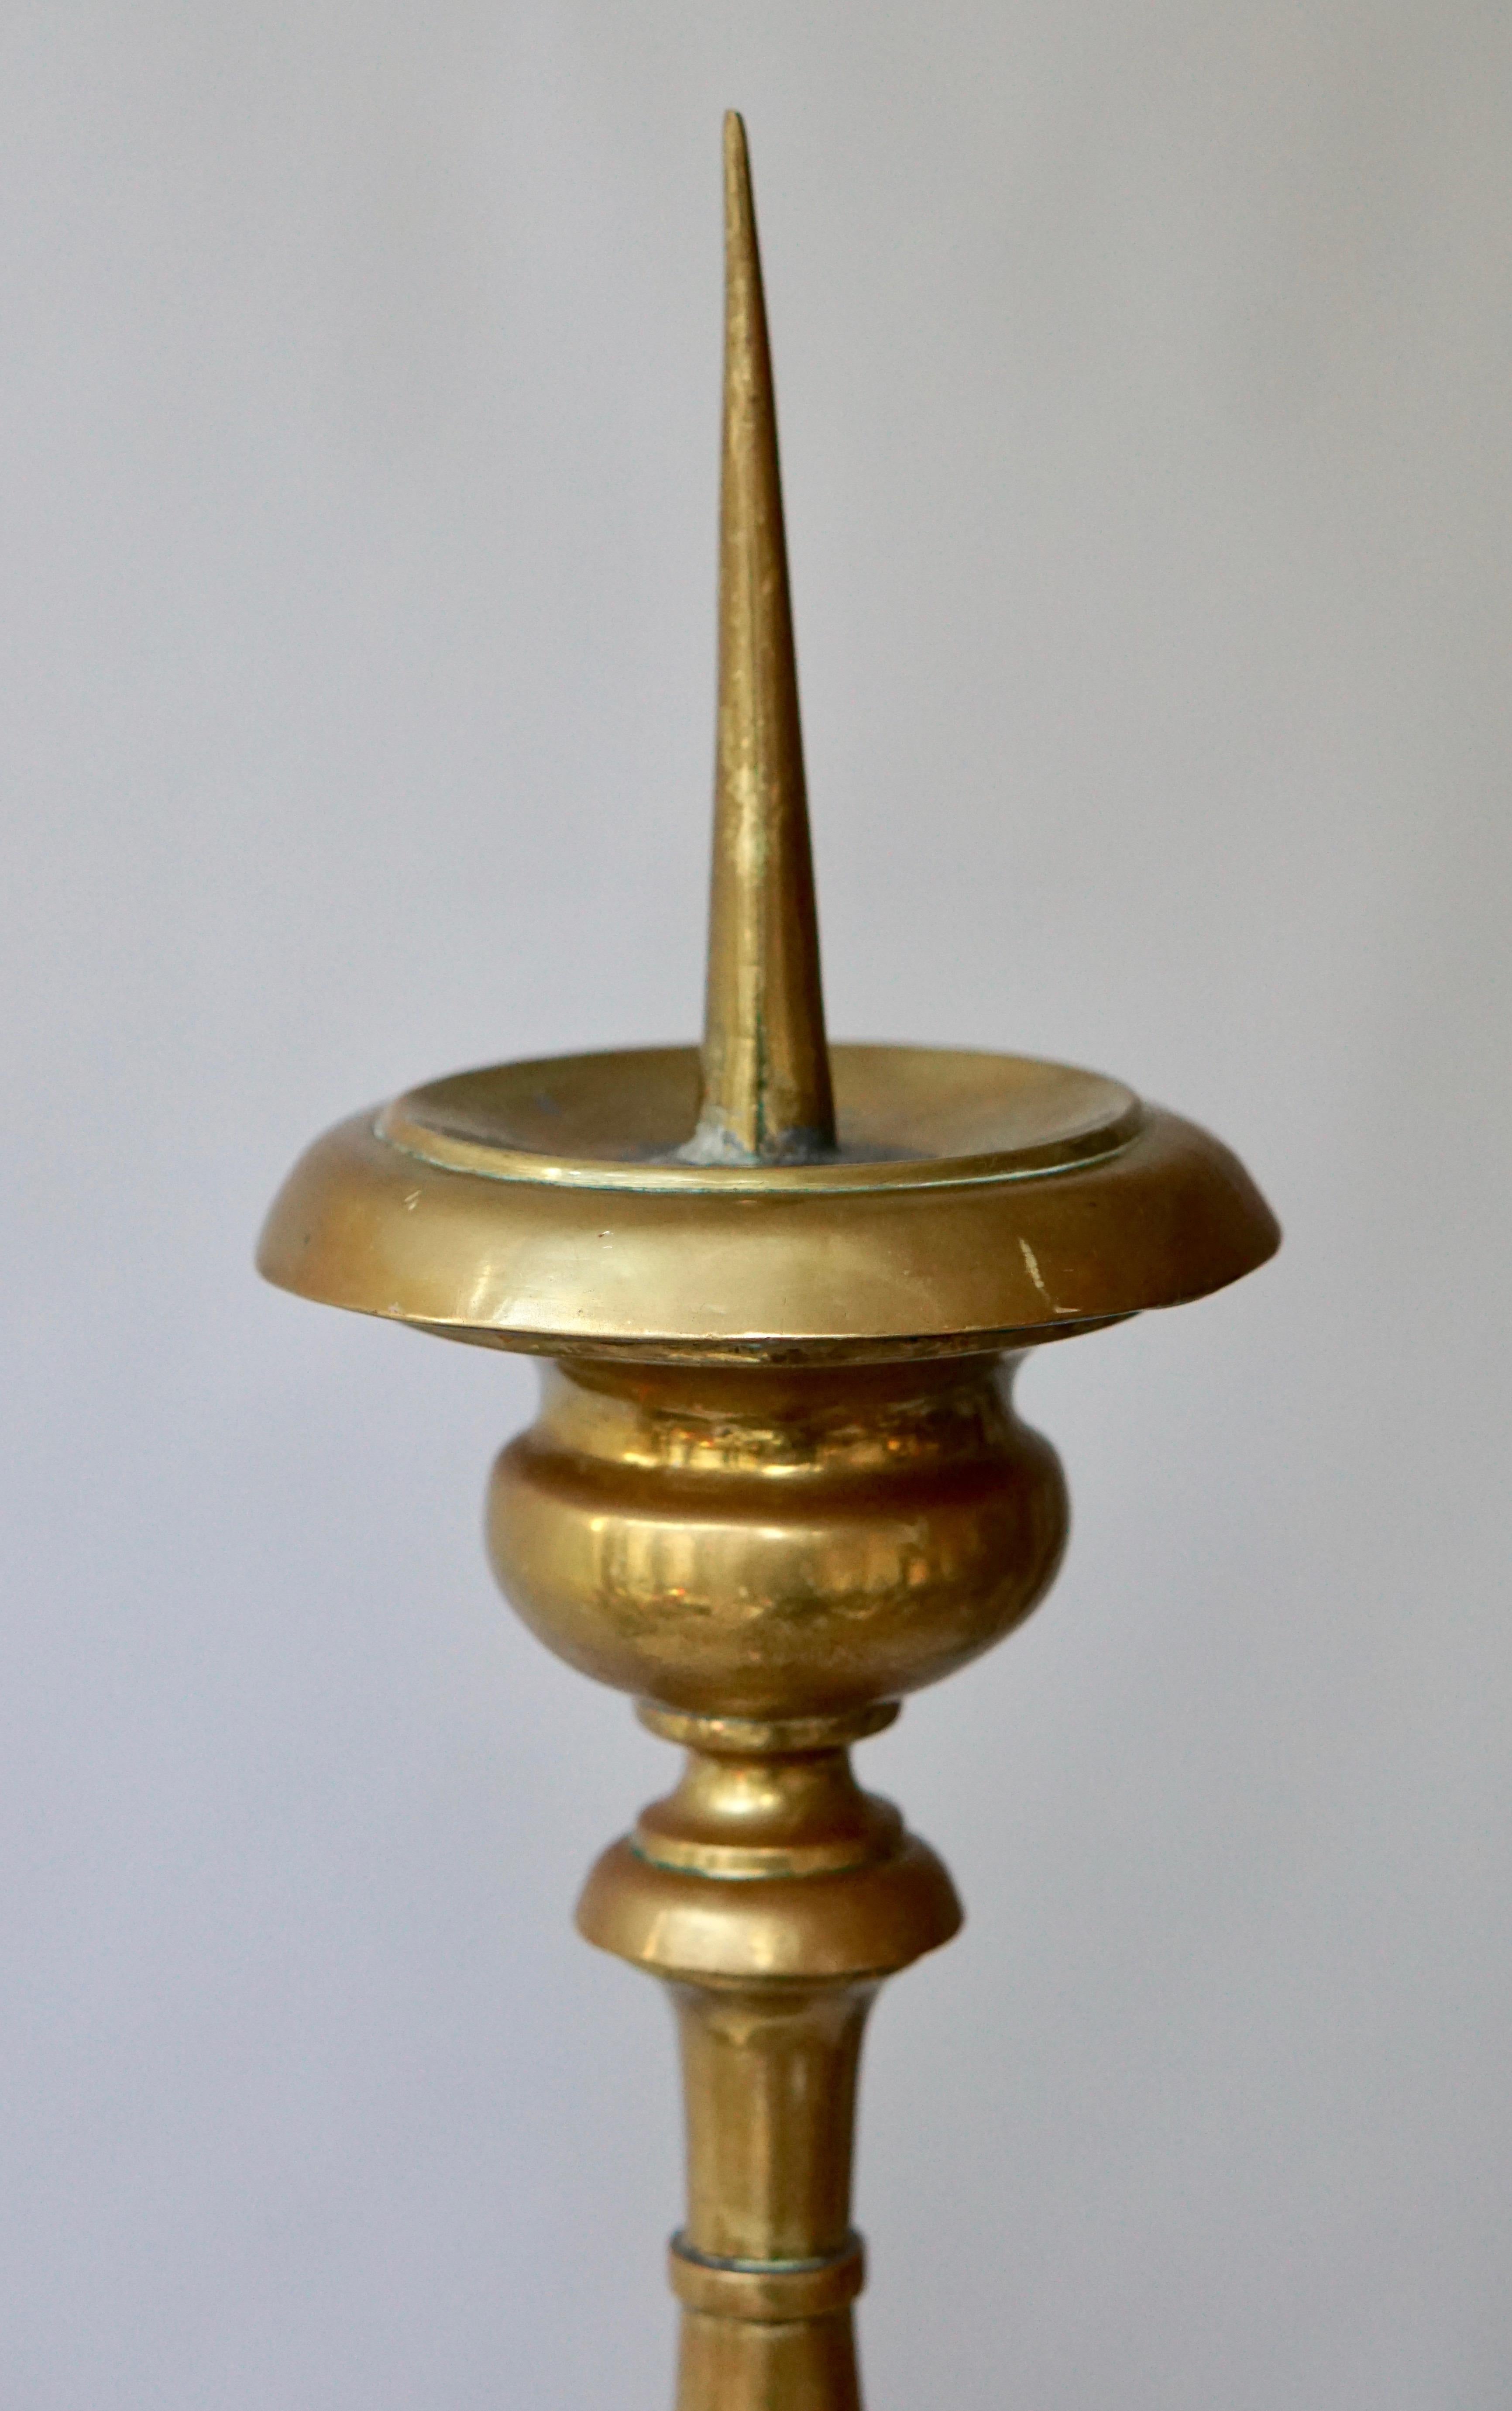 Polished Brass Tall Torchere, Candlestick or Prickets, 19th Century For Sale 5